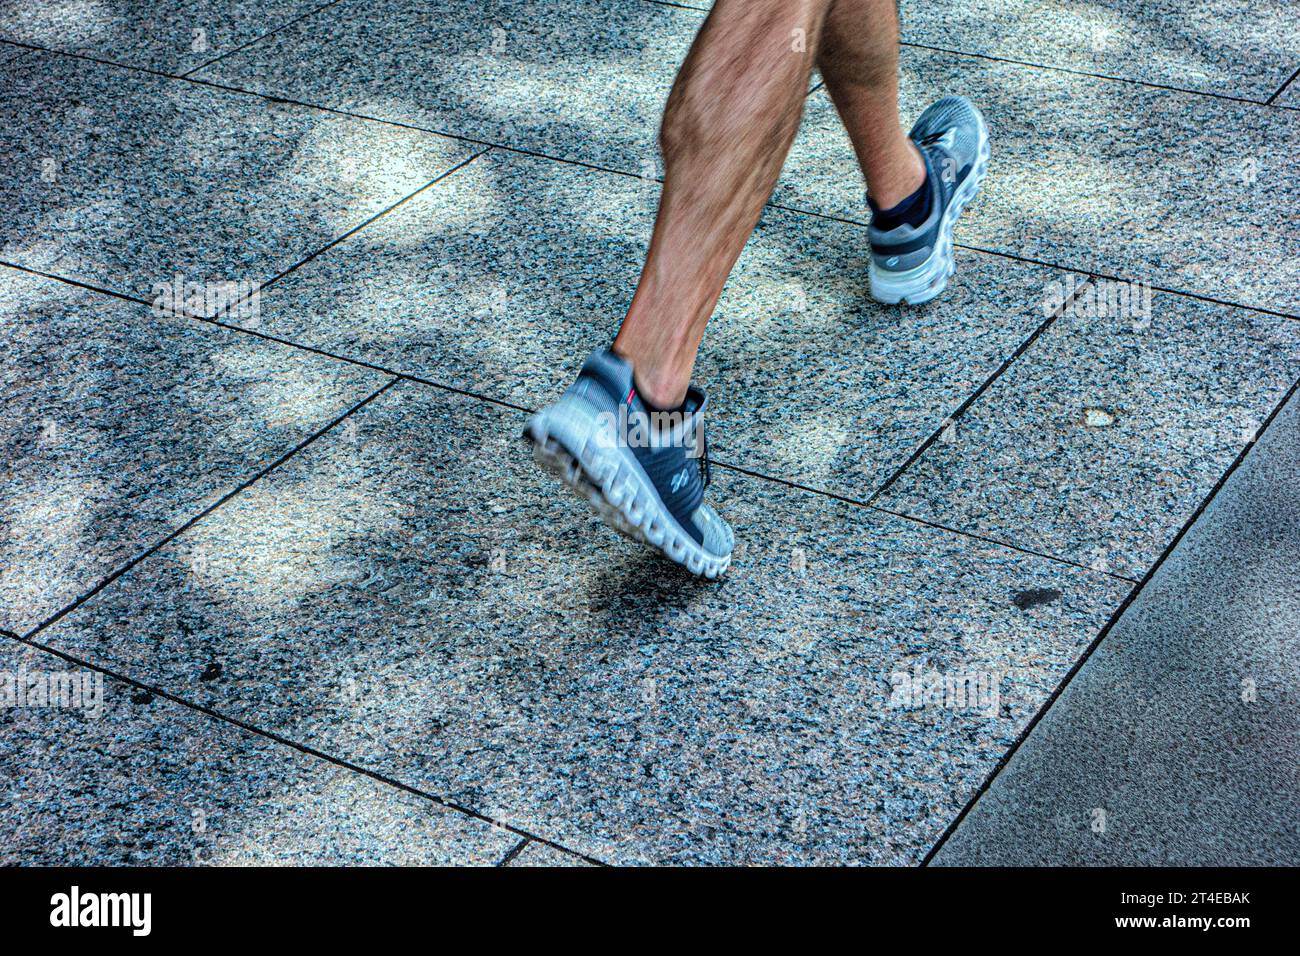 Close-up of feet walking, wearing sneakers or trainers Stock Photo